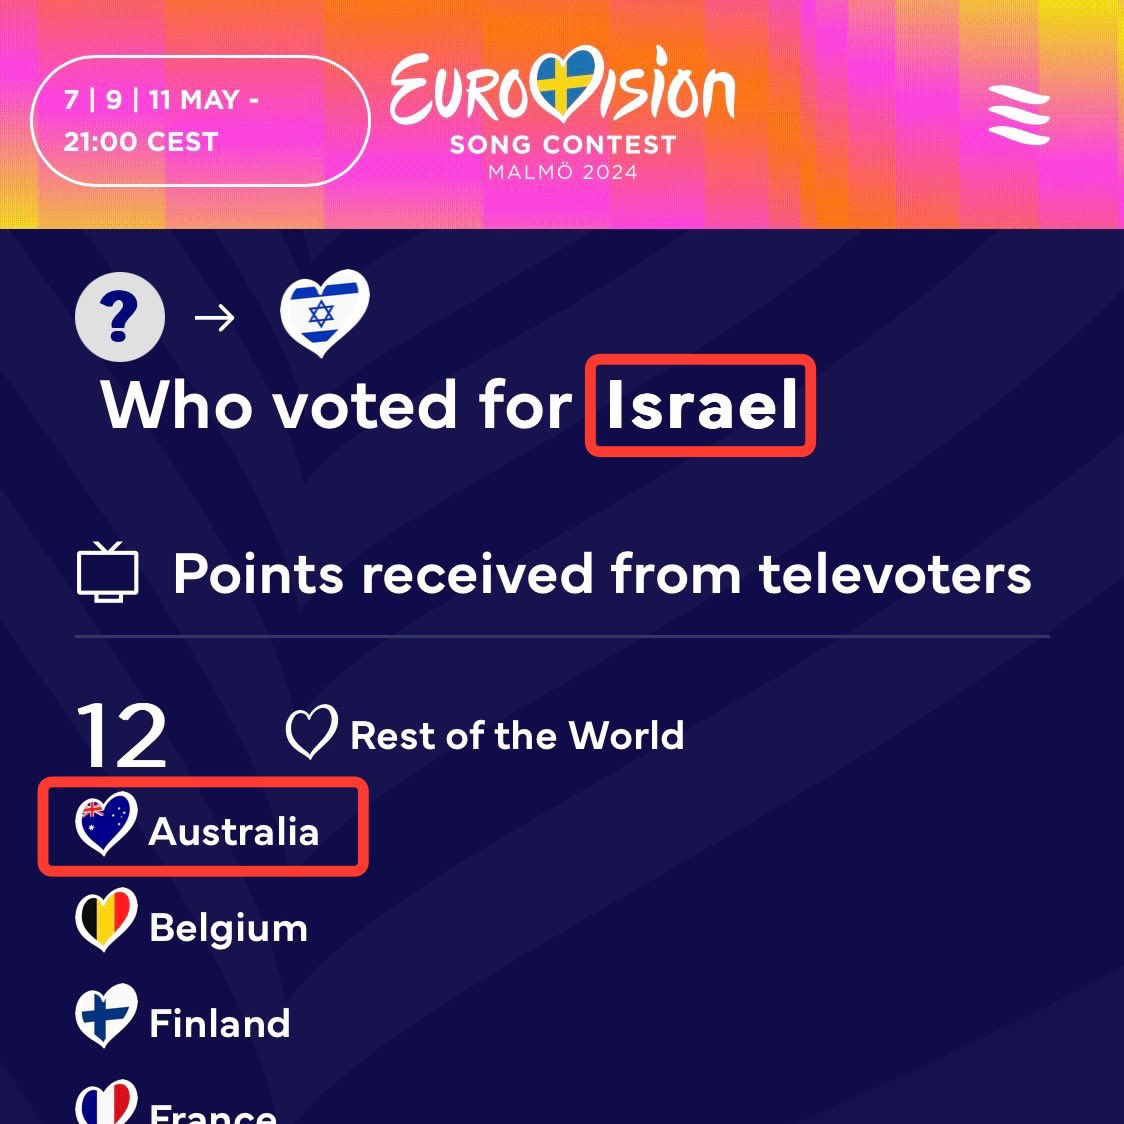 Australian government: backs Hamas statehood. Australian people: rally behind Israel at #Eurovision2024. Once again, the government’s moral facade clashes with the desires of the people they should be representing.